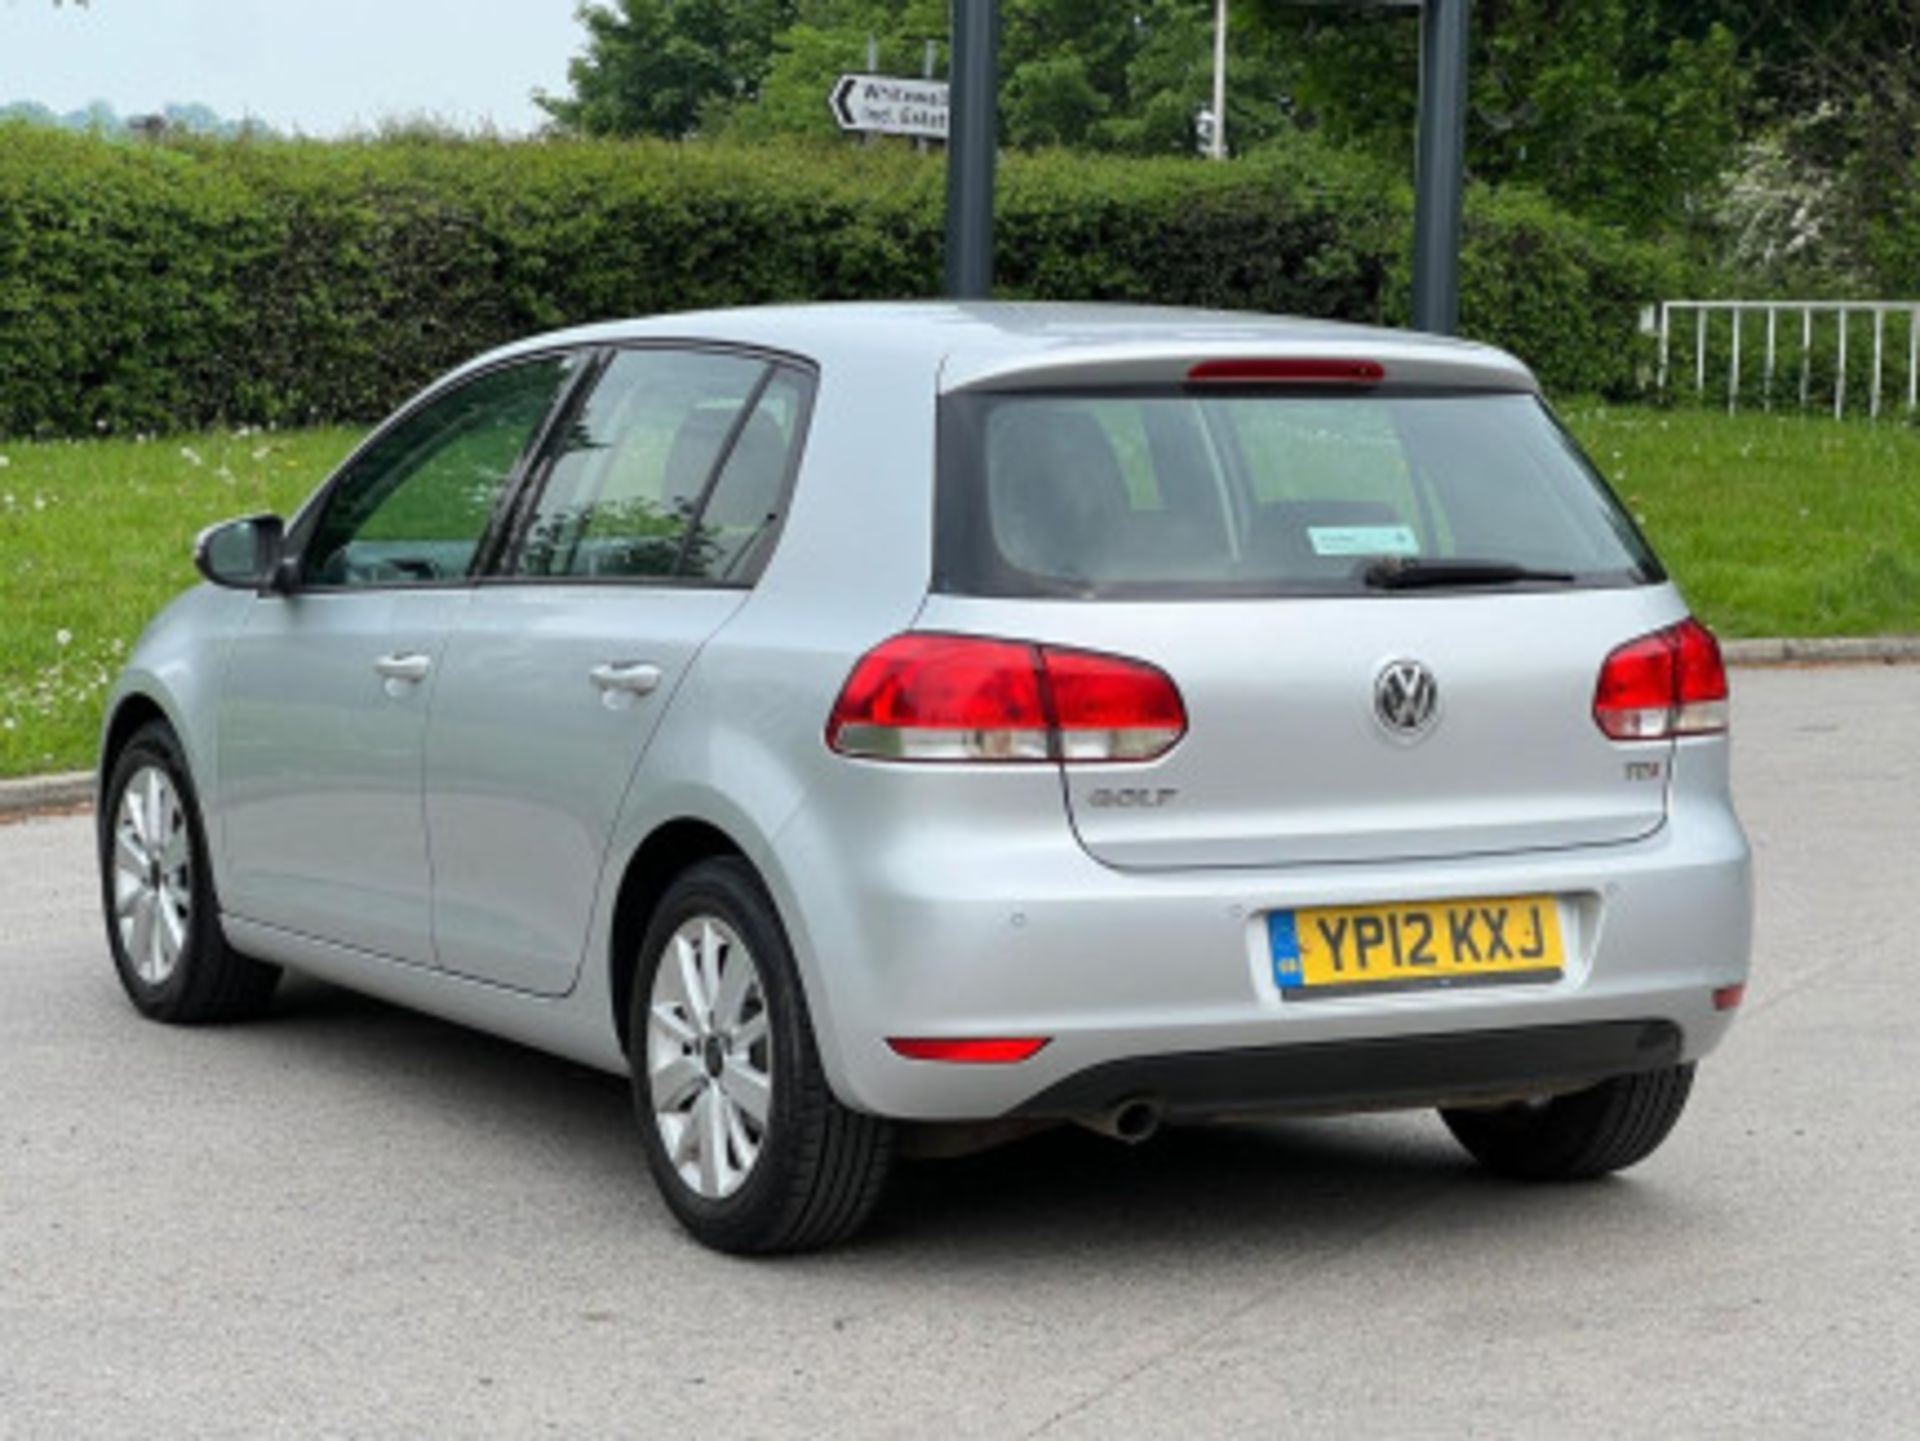 IMPECCABLE 2012 VOLKSWAGEN GOLF 1.6 TDI MATCH >>--NO VAT ON HAMMER--<< - Image 54 of 116